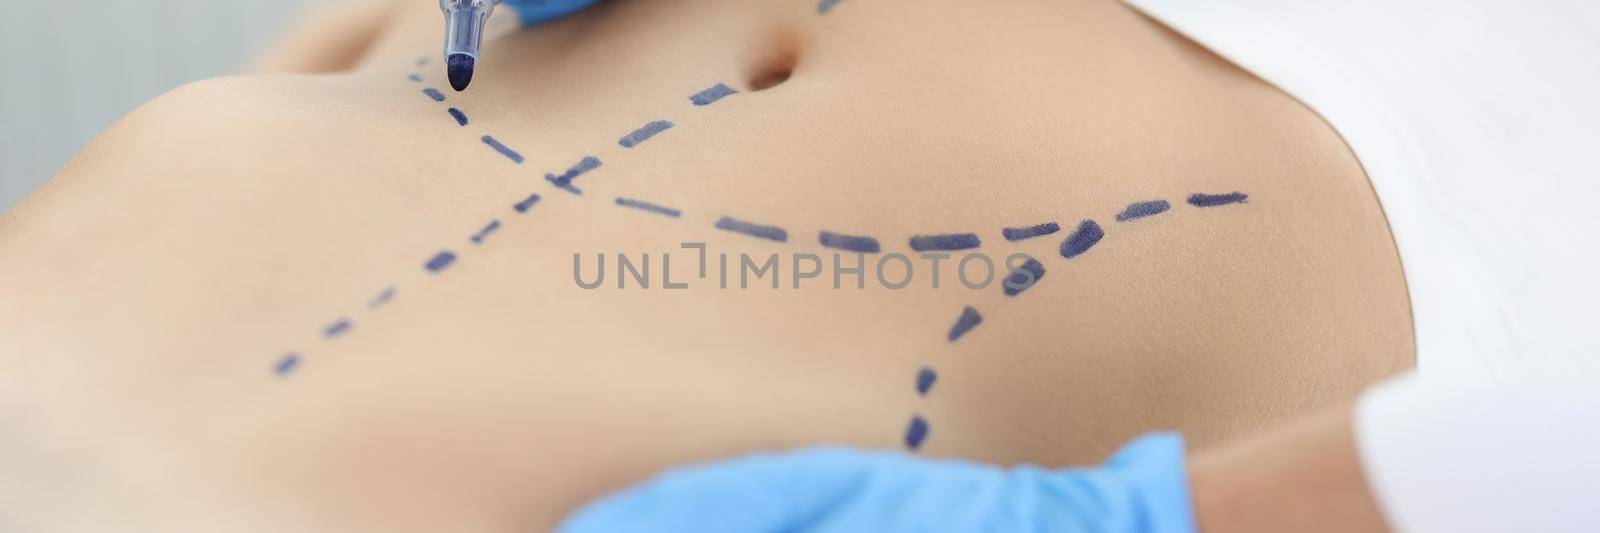 Doctor plastic surgeon drawing preoperative markings on skin of patient abdomen closeup by kuprevich